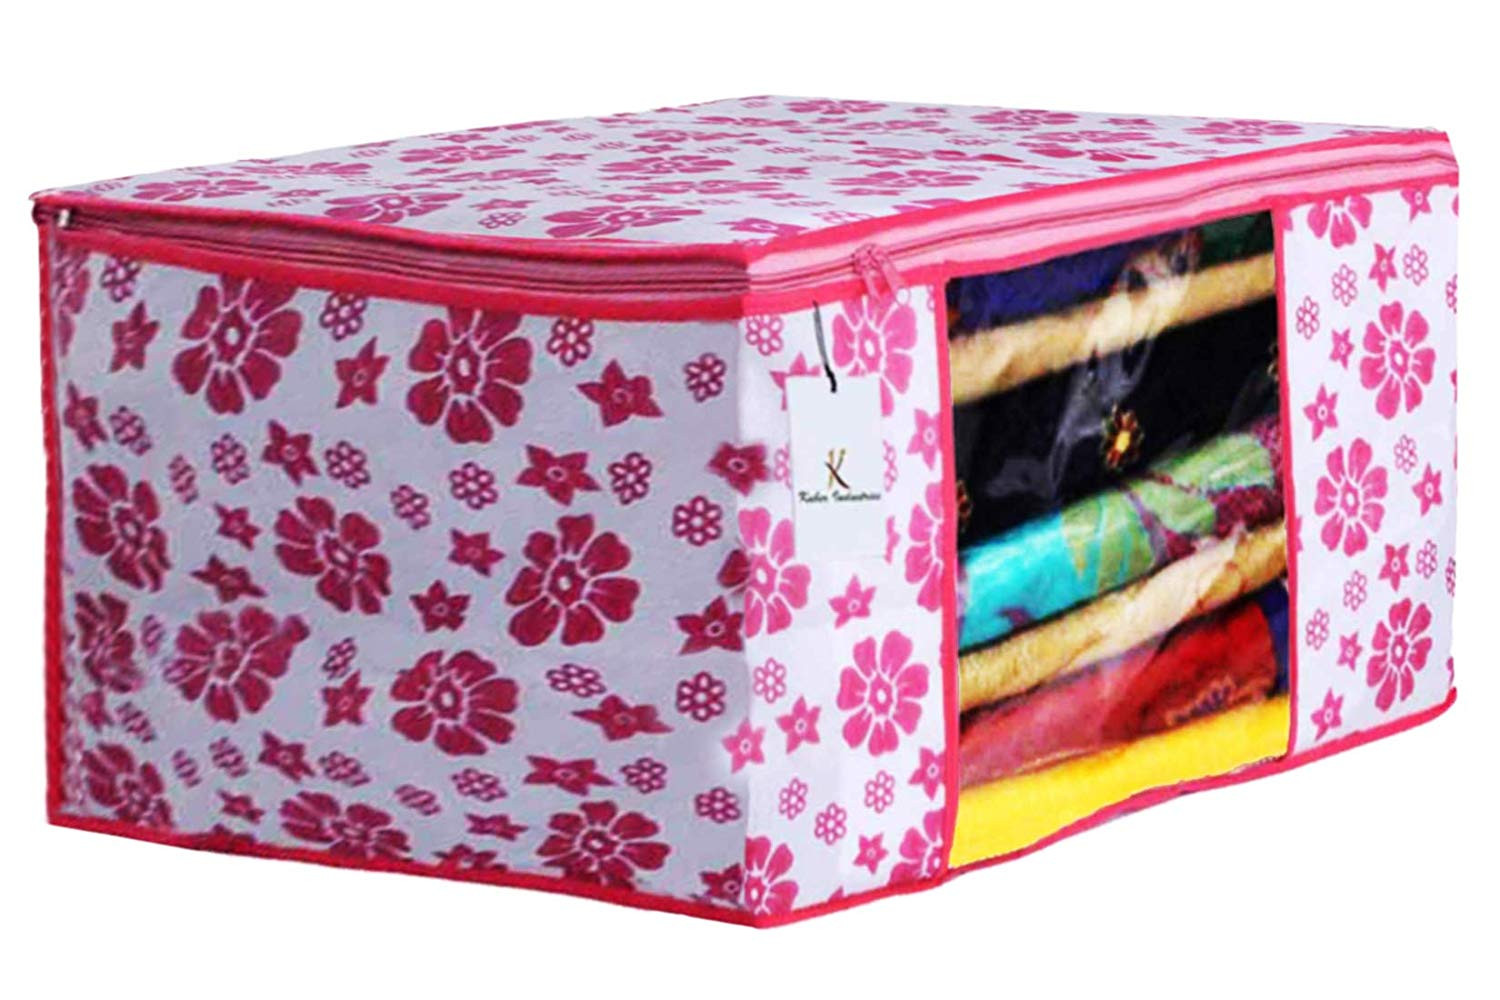 Kuber Industries Metalic & Flower Printed 4 Piece Non Woven Saree Cover And 4 Pieces Underbed Storage Bag, Storage Organiser, Blanket Cover, Pink & Blue & Ivory Red & Golden Brown  -CTKTC42449